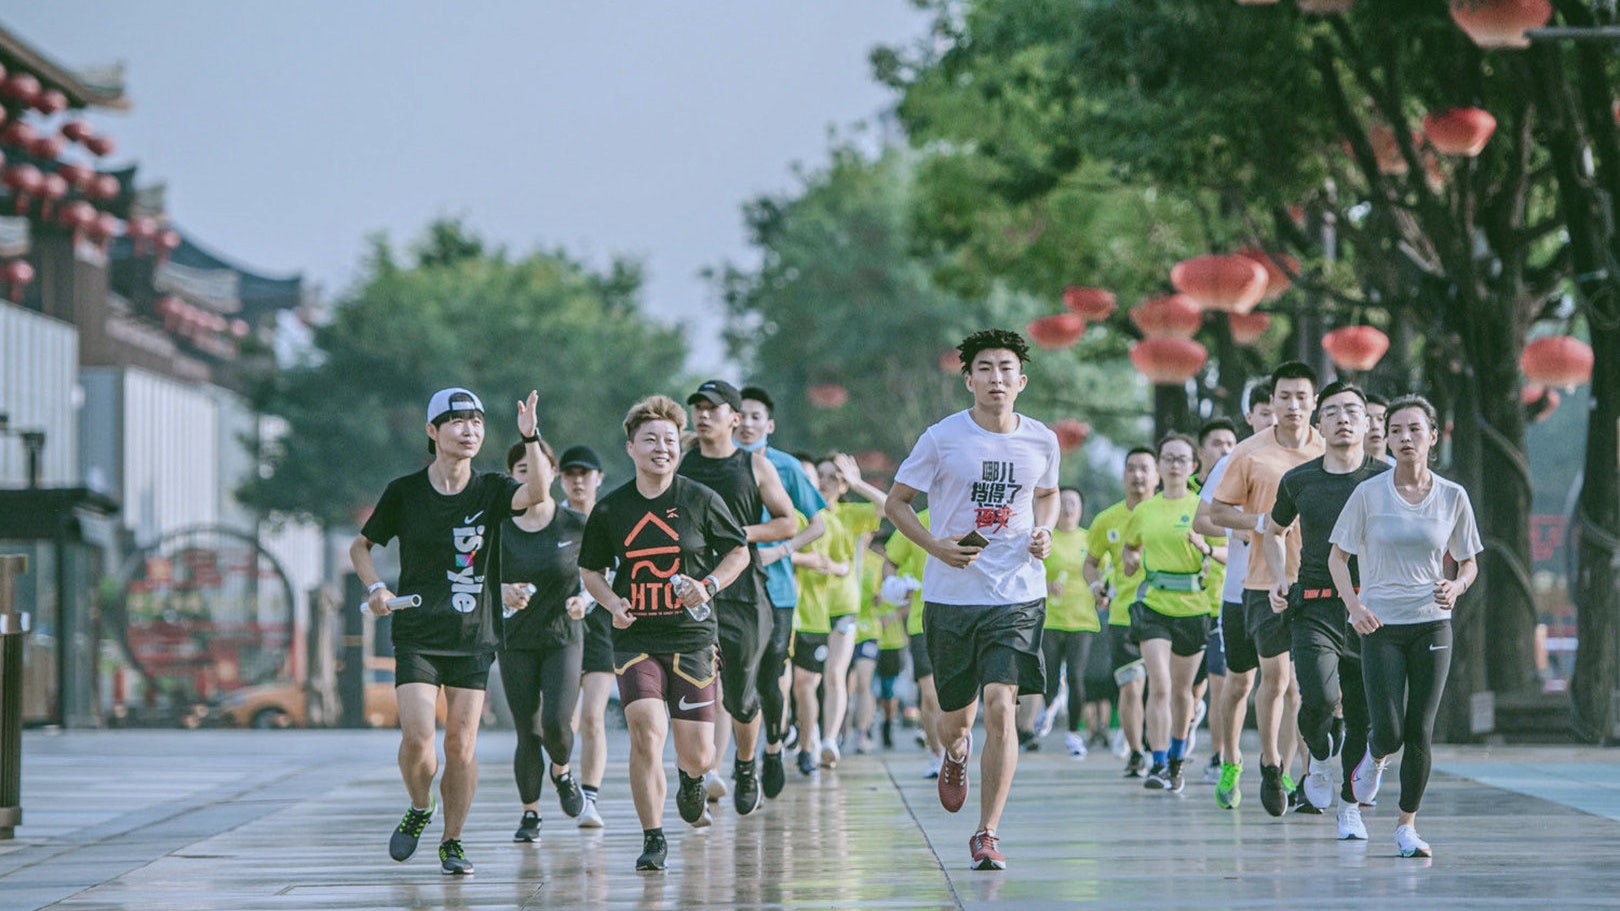 Nike’s popular running app has announced the suspension of its services in China. Is the sportswear giant losing even more footing in the local market? Photo: Nike